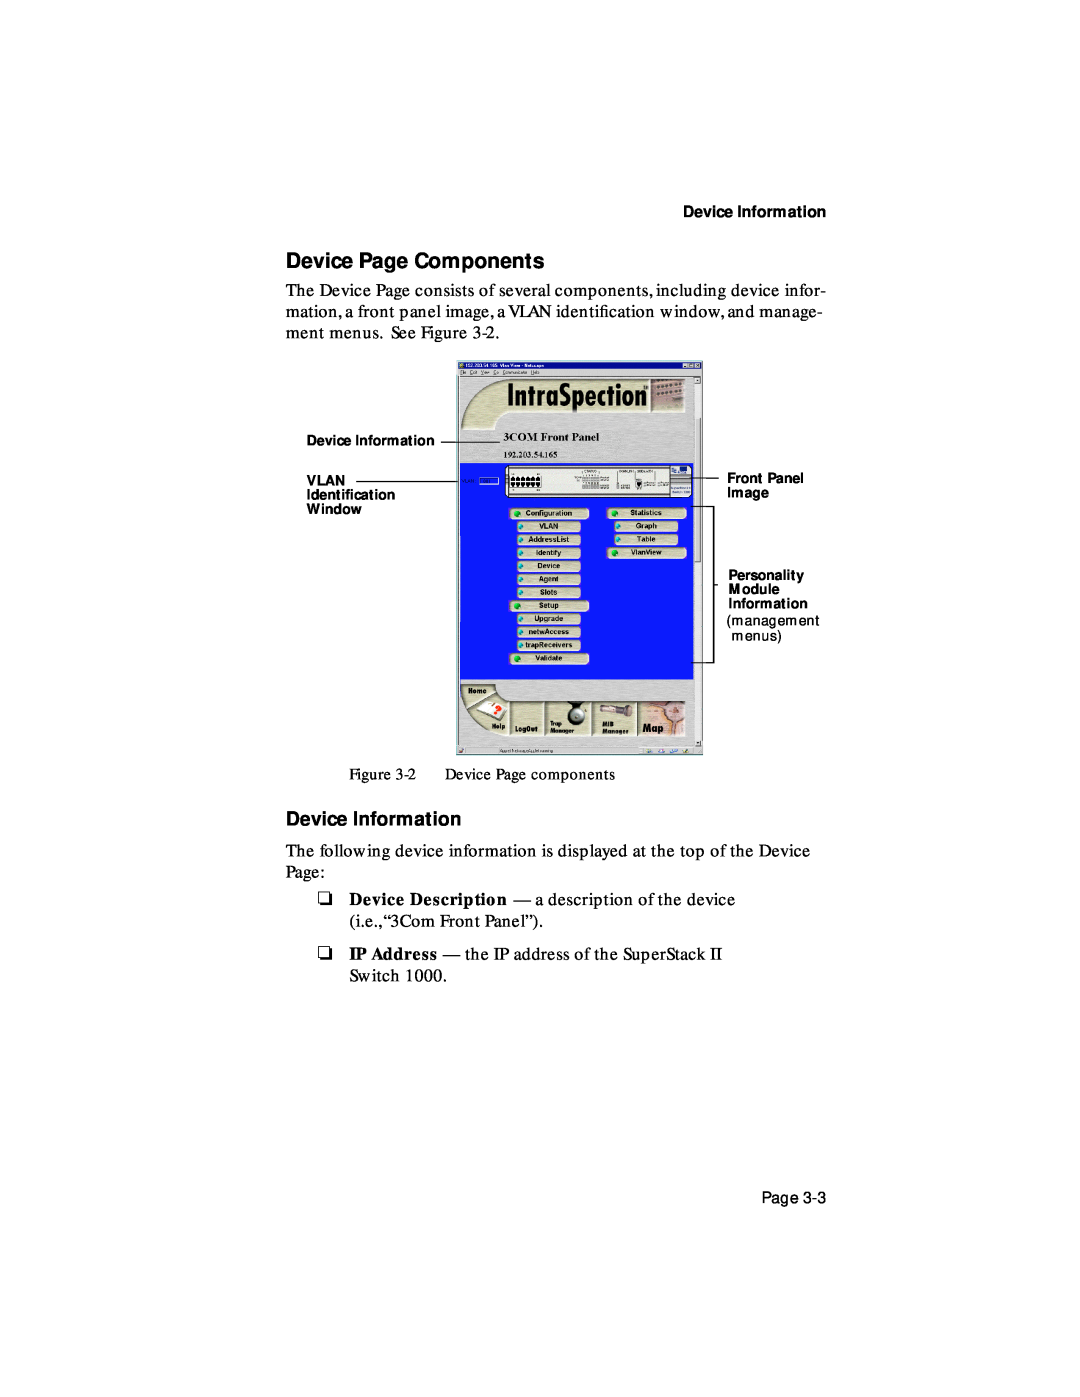 Asante Technologies 1000 user manual Device Page Components, Device Information 